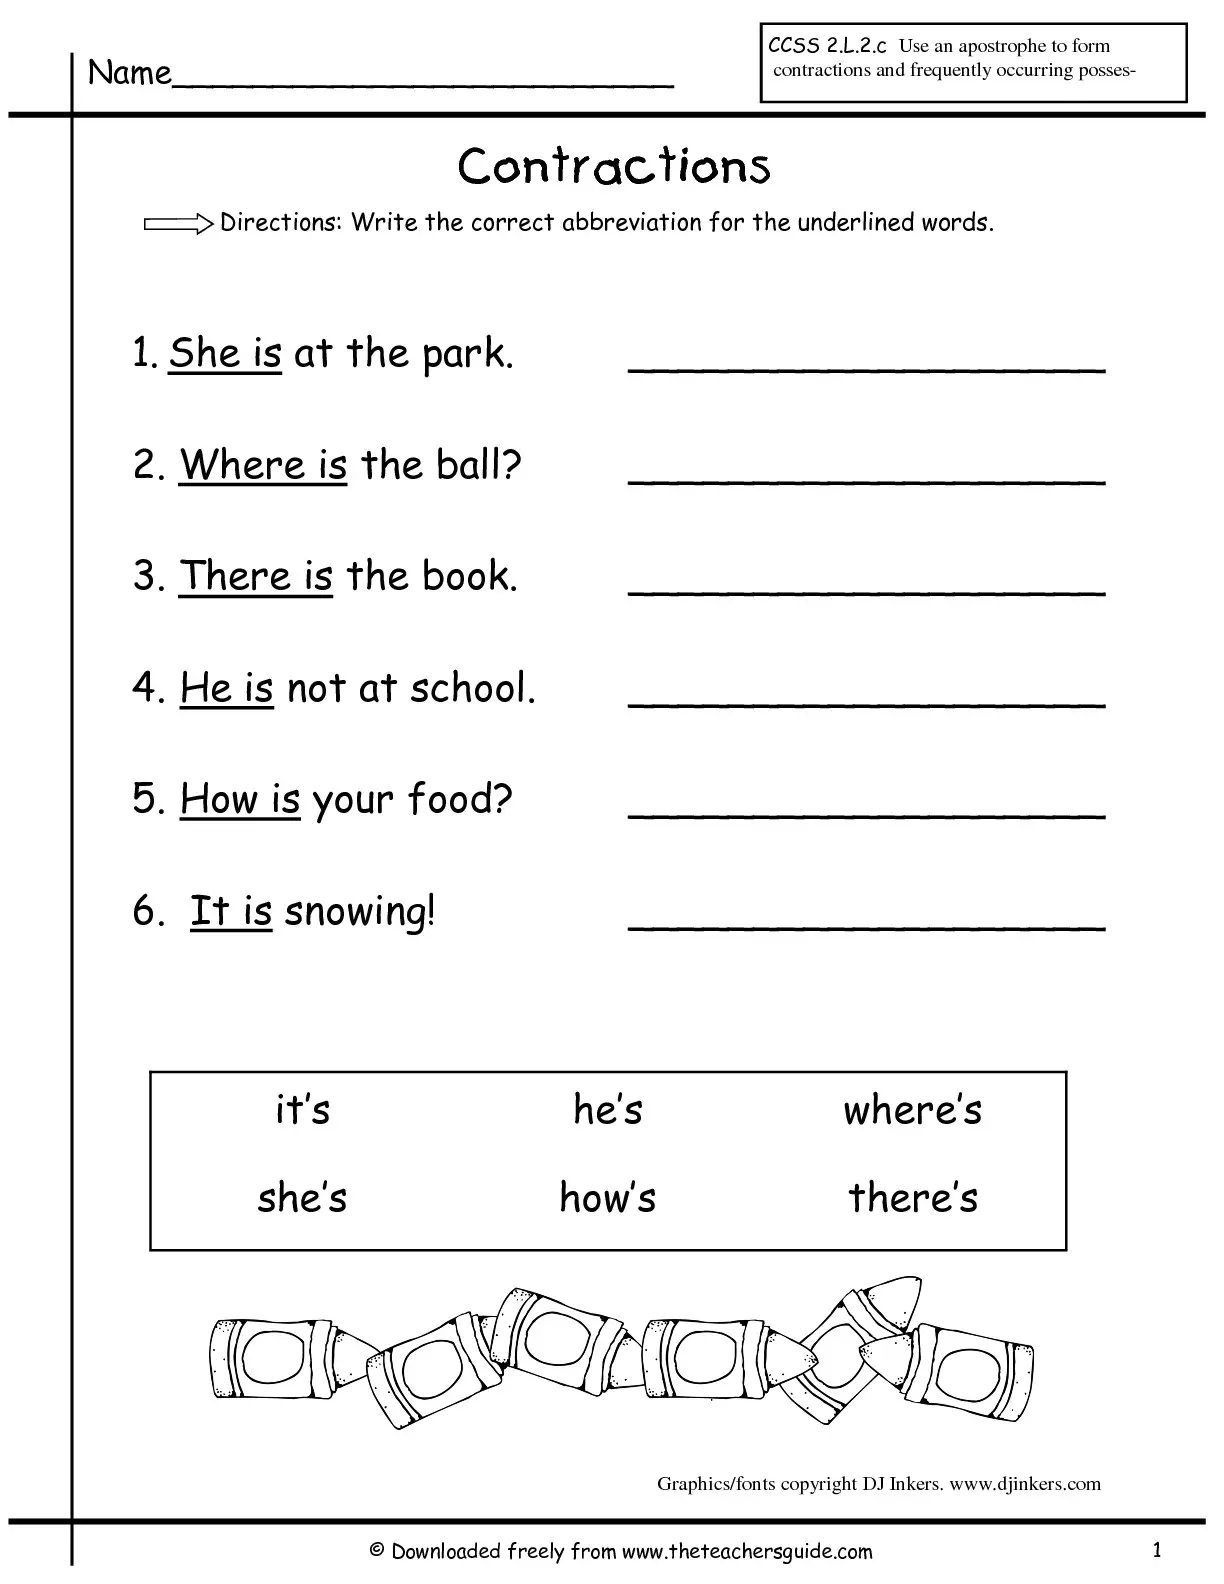 20 Contractions Worksheets for Improving Your Grammar - Kitty Baby For Contractions Worksheet 2nd Grade